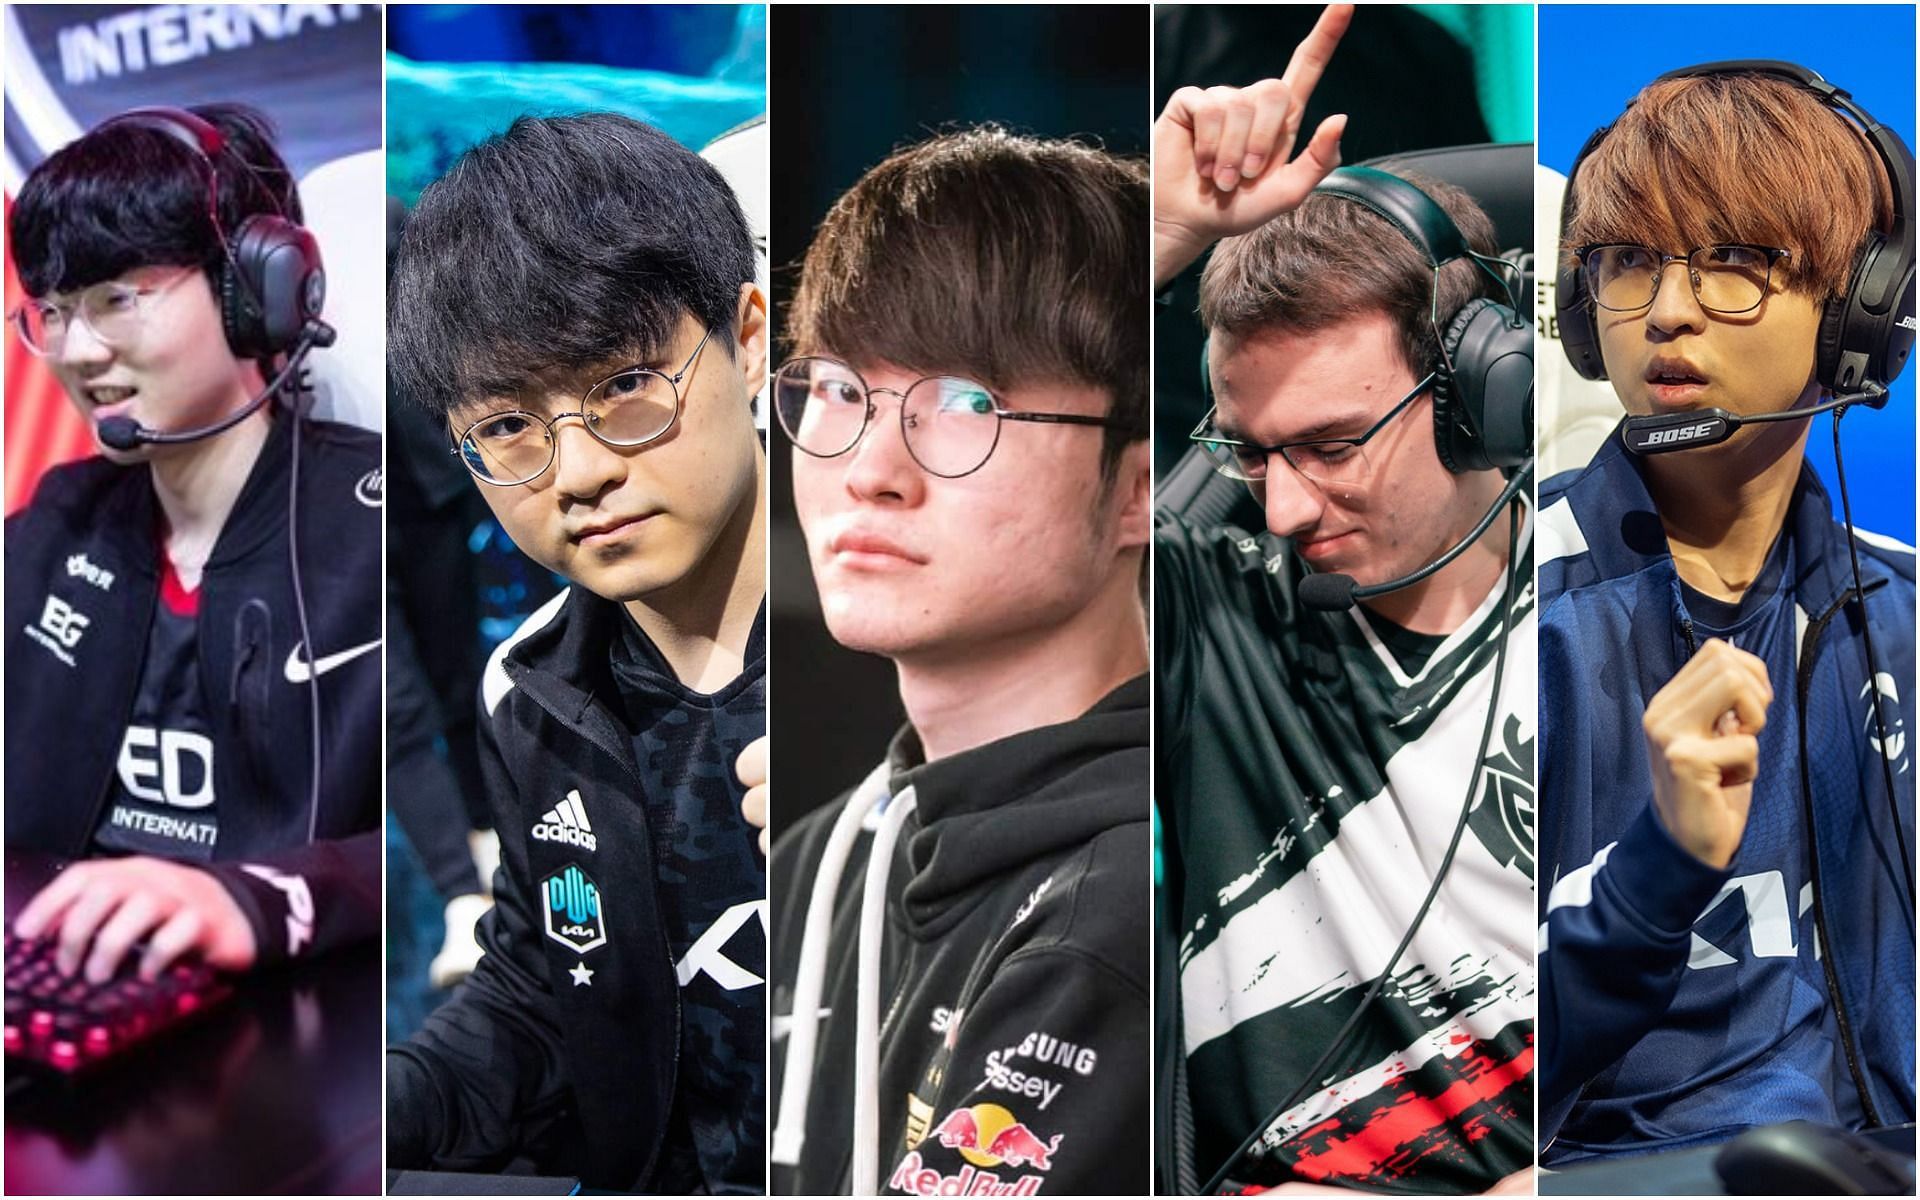 Who would be the defacto face of League of Legends? : r/leagueoflegends